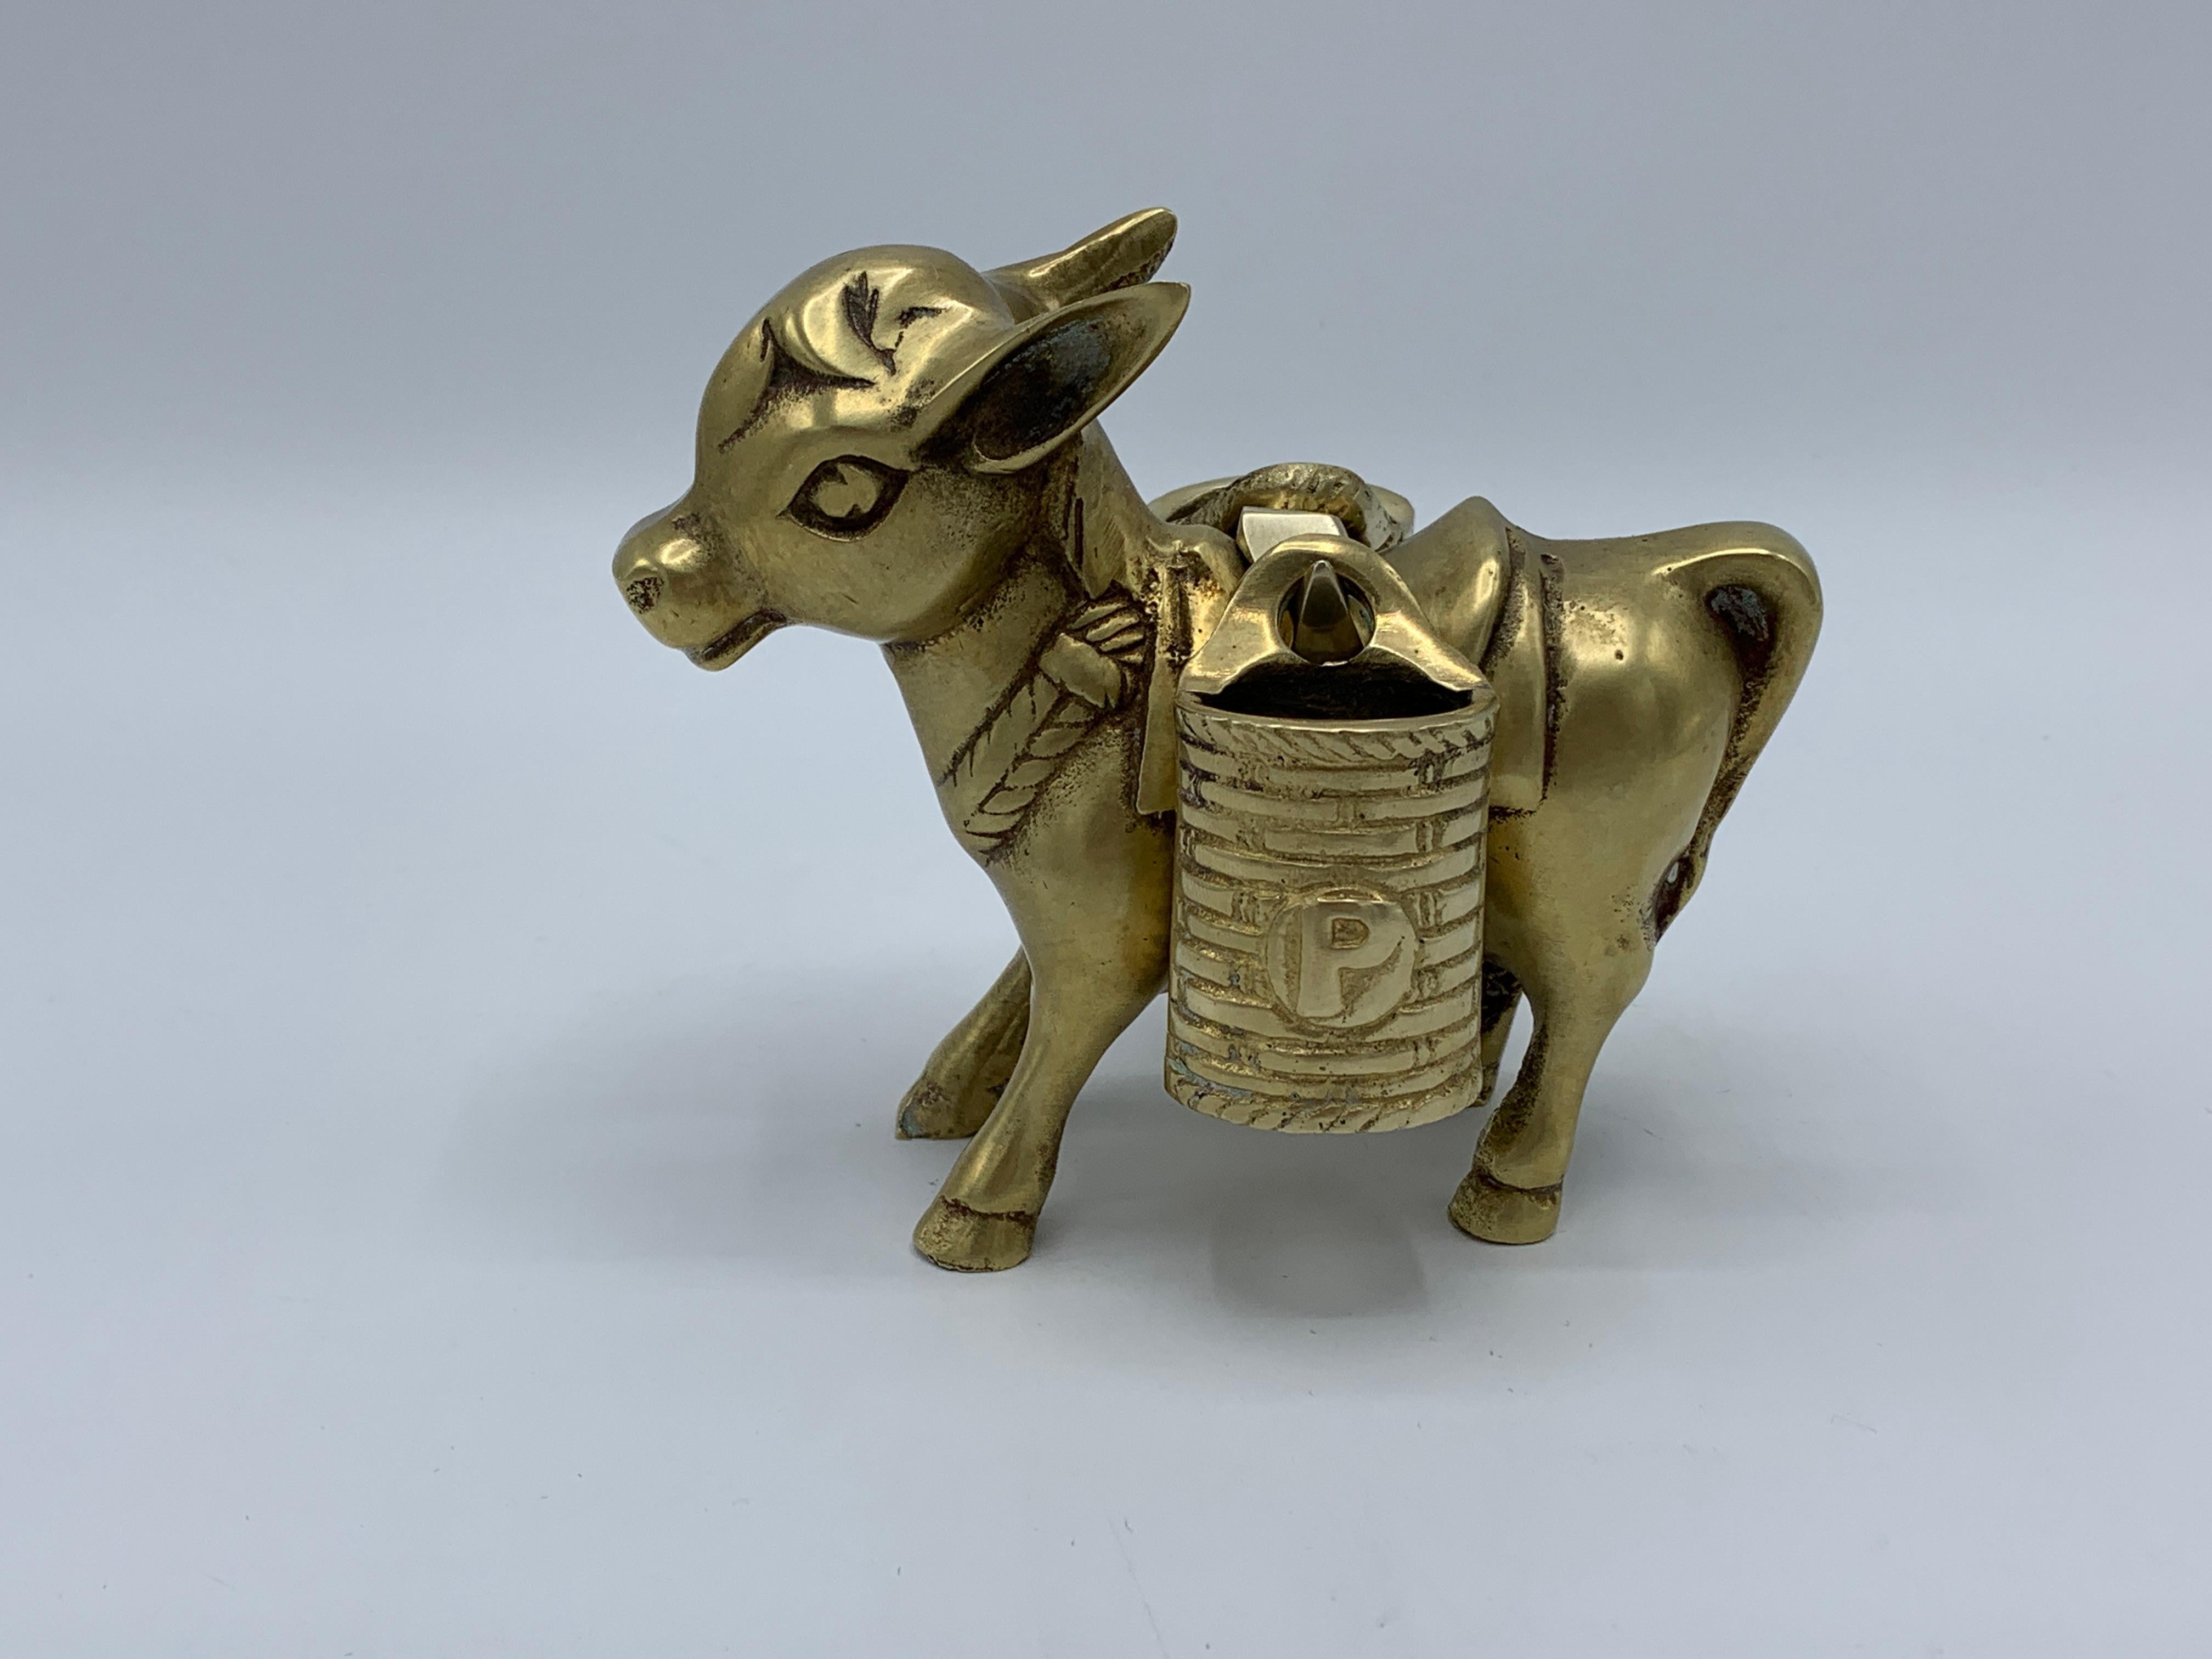 Offered is a unique, 1960s solid-brass salt and pepper shaker set of a mule with saddle bags. Each bag is stamped with an 